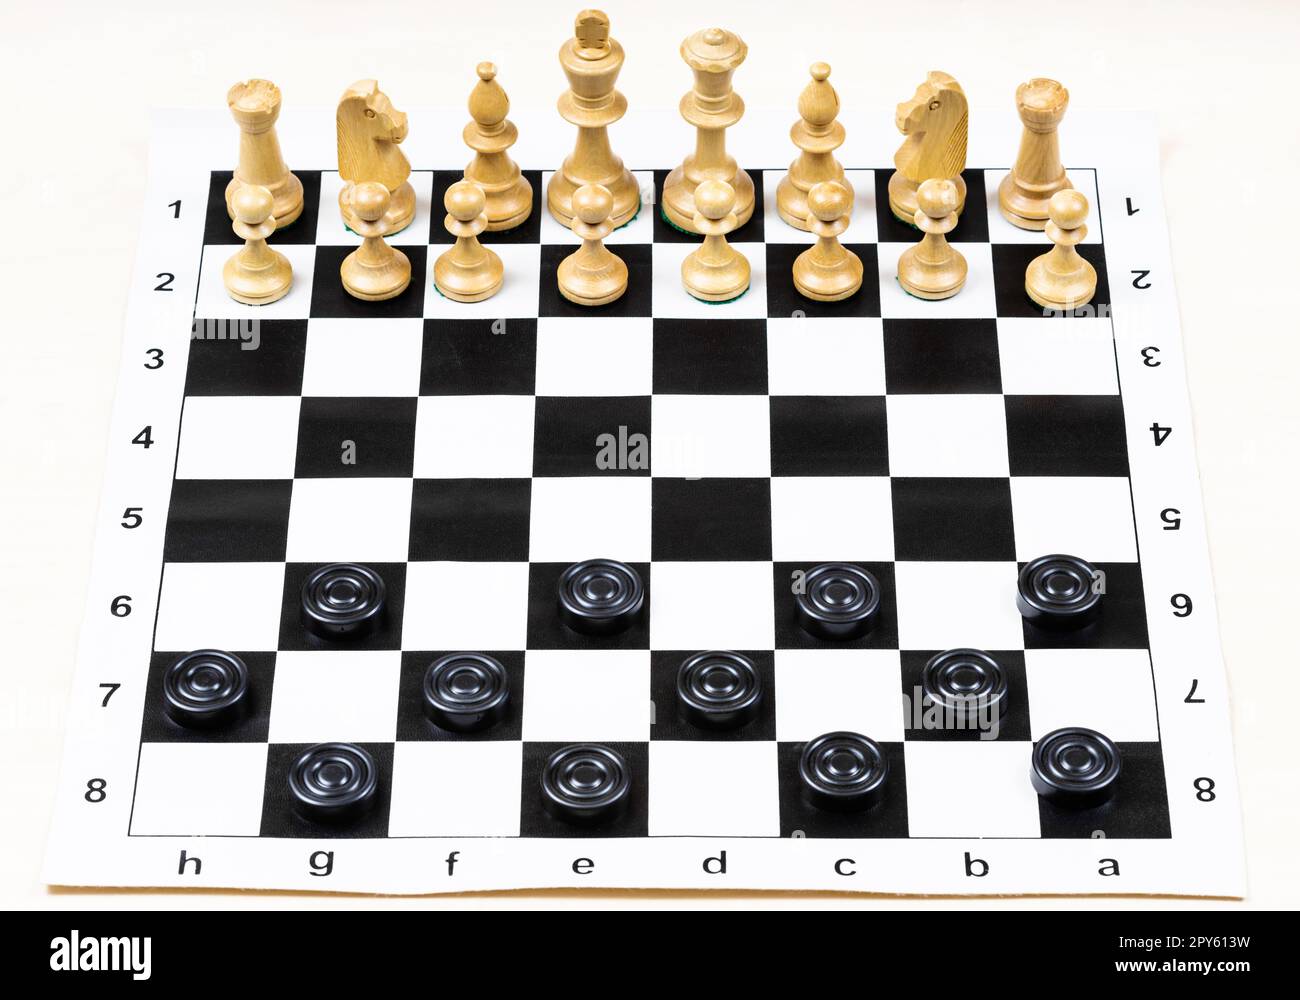 chess and checkers pieces in starting positions Stock Photo